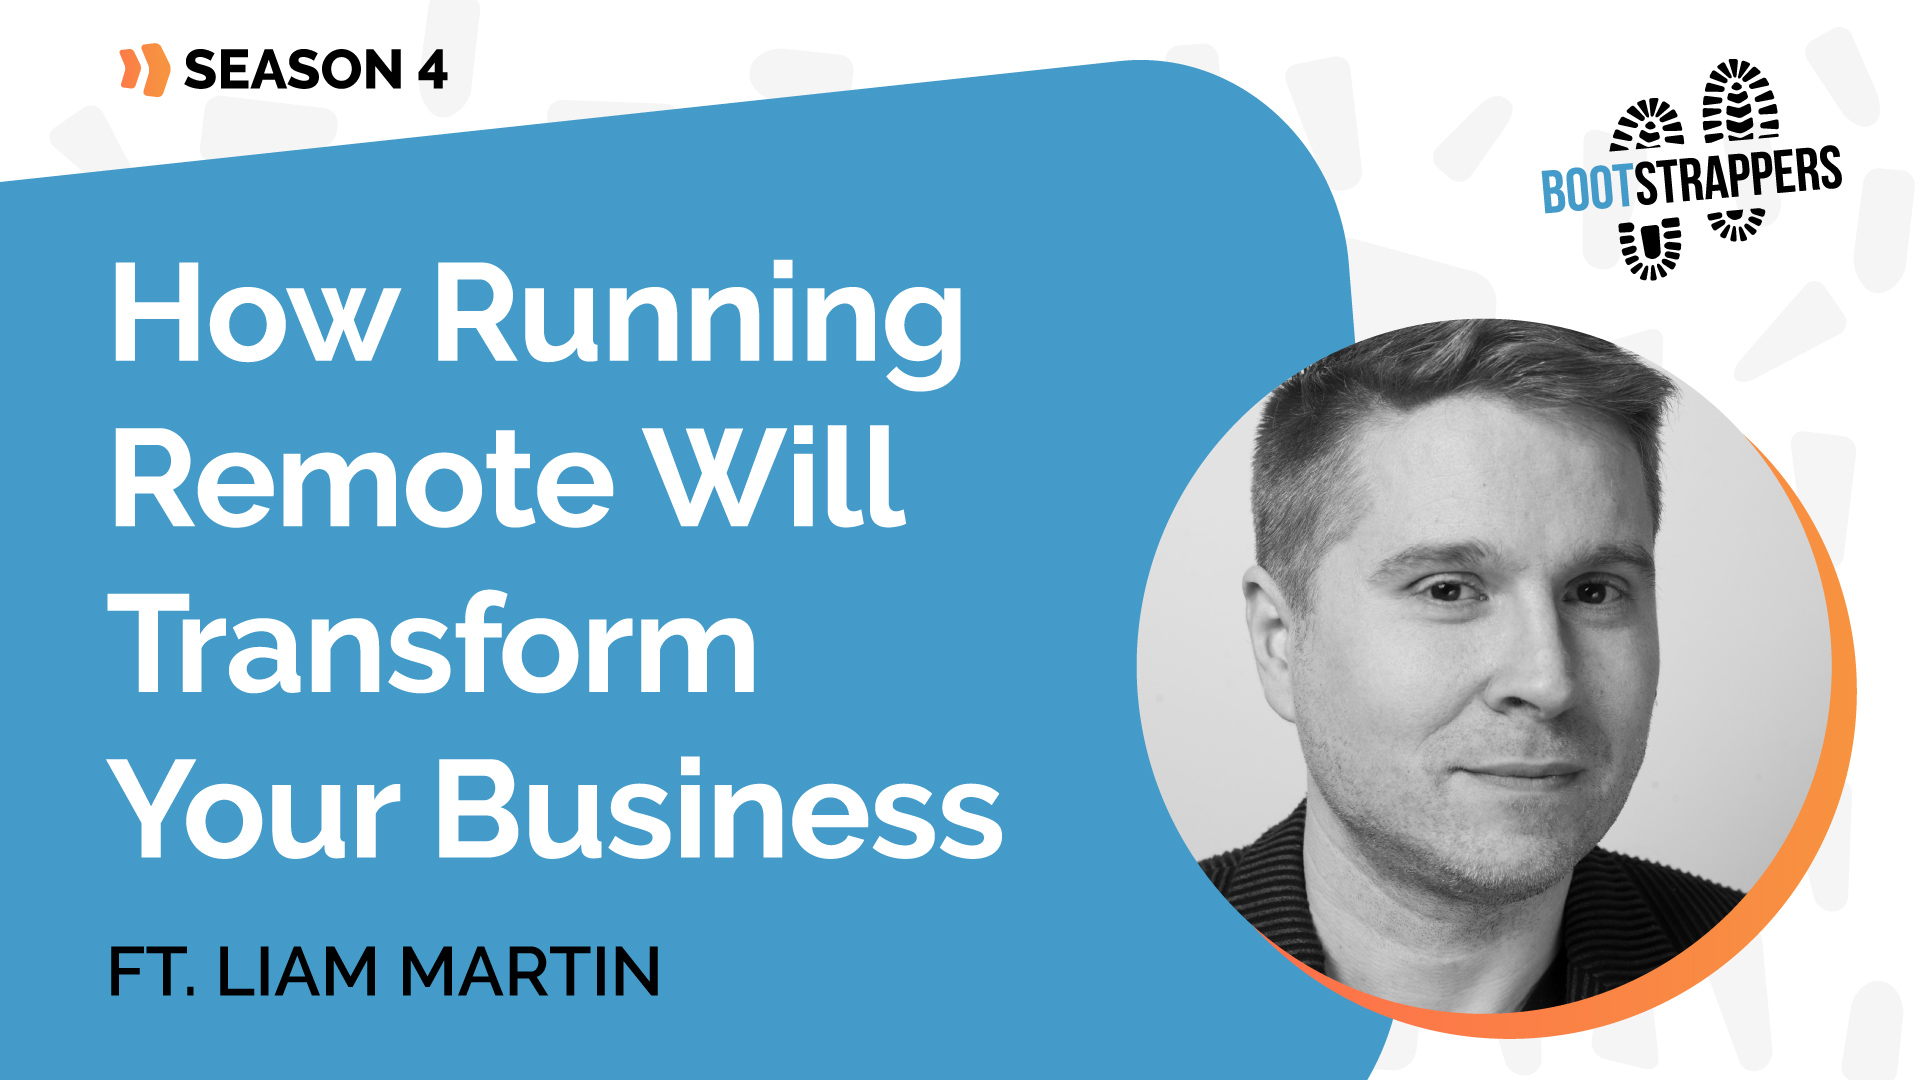 Anequim-Bootstrappers-How-Running-Remote-Will-Transform-Your-Business-Ft-Liam-Martin